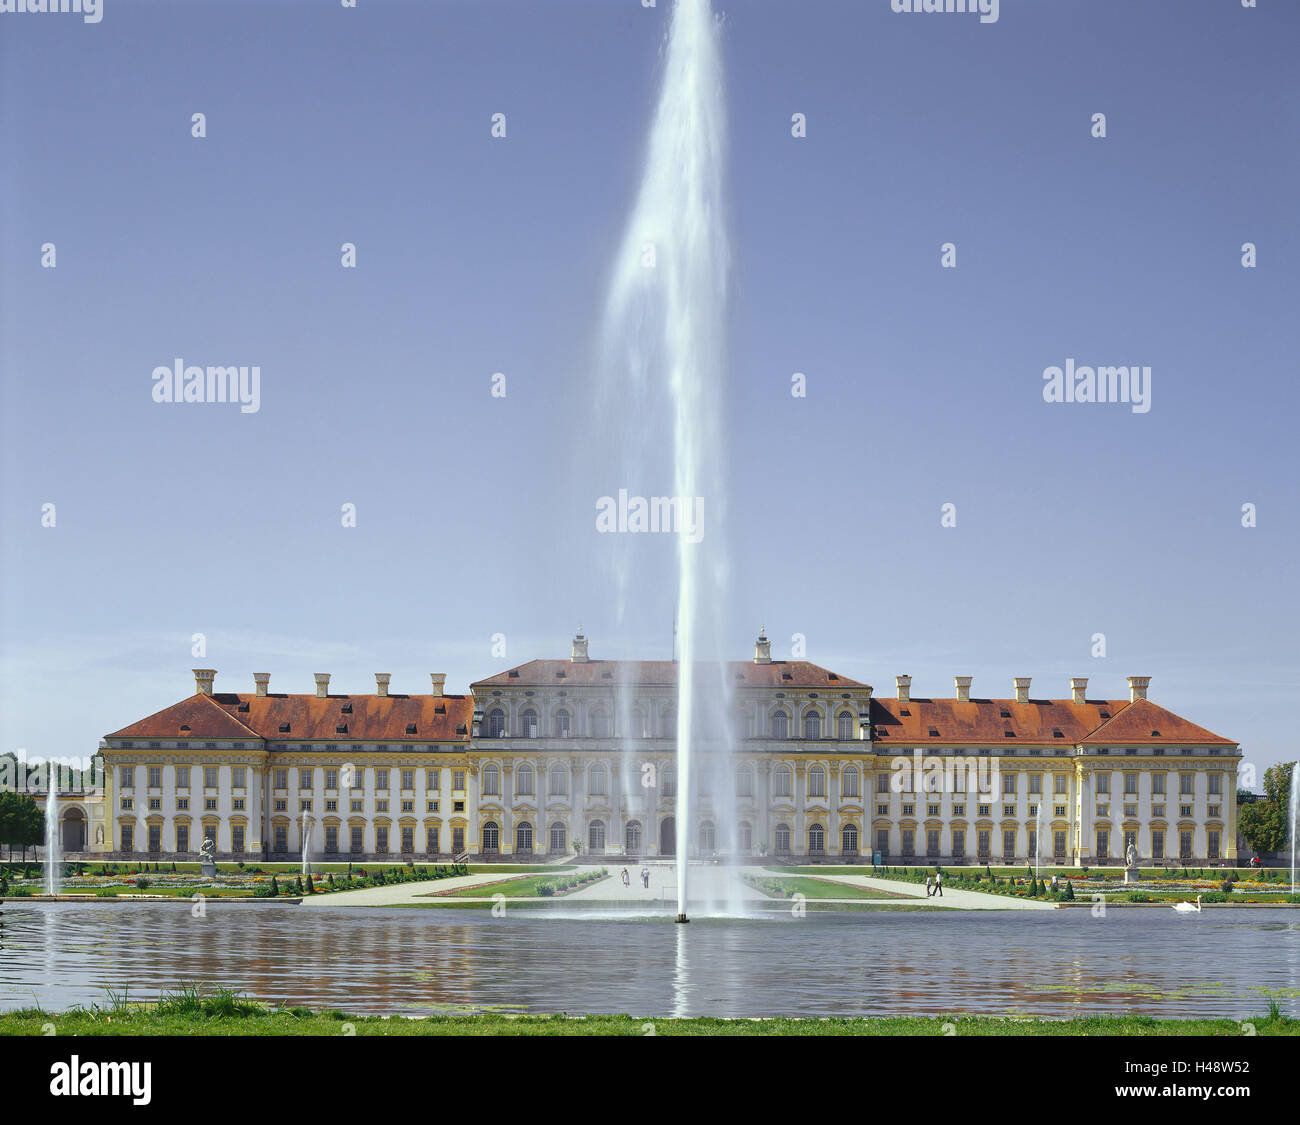 Germany, Bavaria, new castle, tench home, water jet, Upper Bavaria, tench home, structure, architecture, place of interest, tourism, building, lock, facade, court garden, water cymbal, jet, Stock Photo